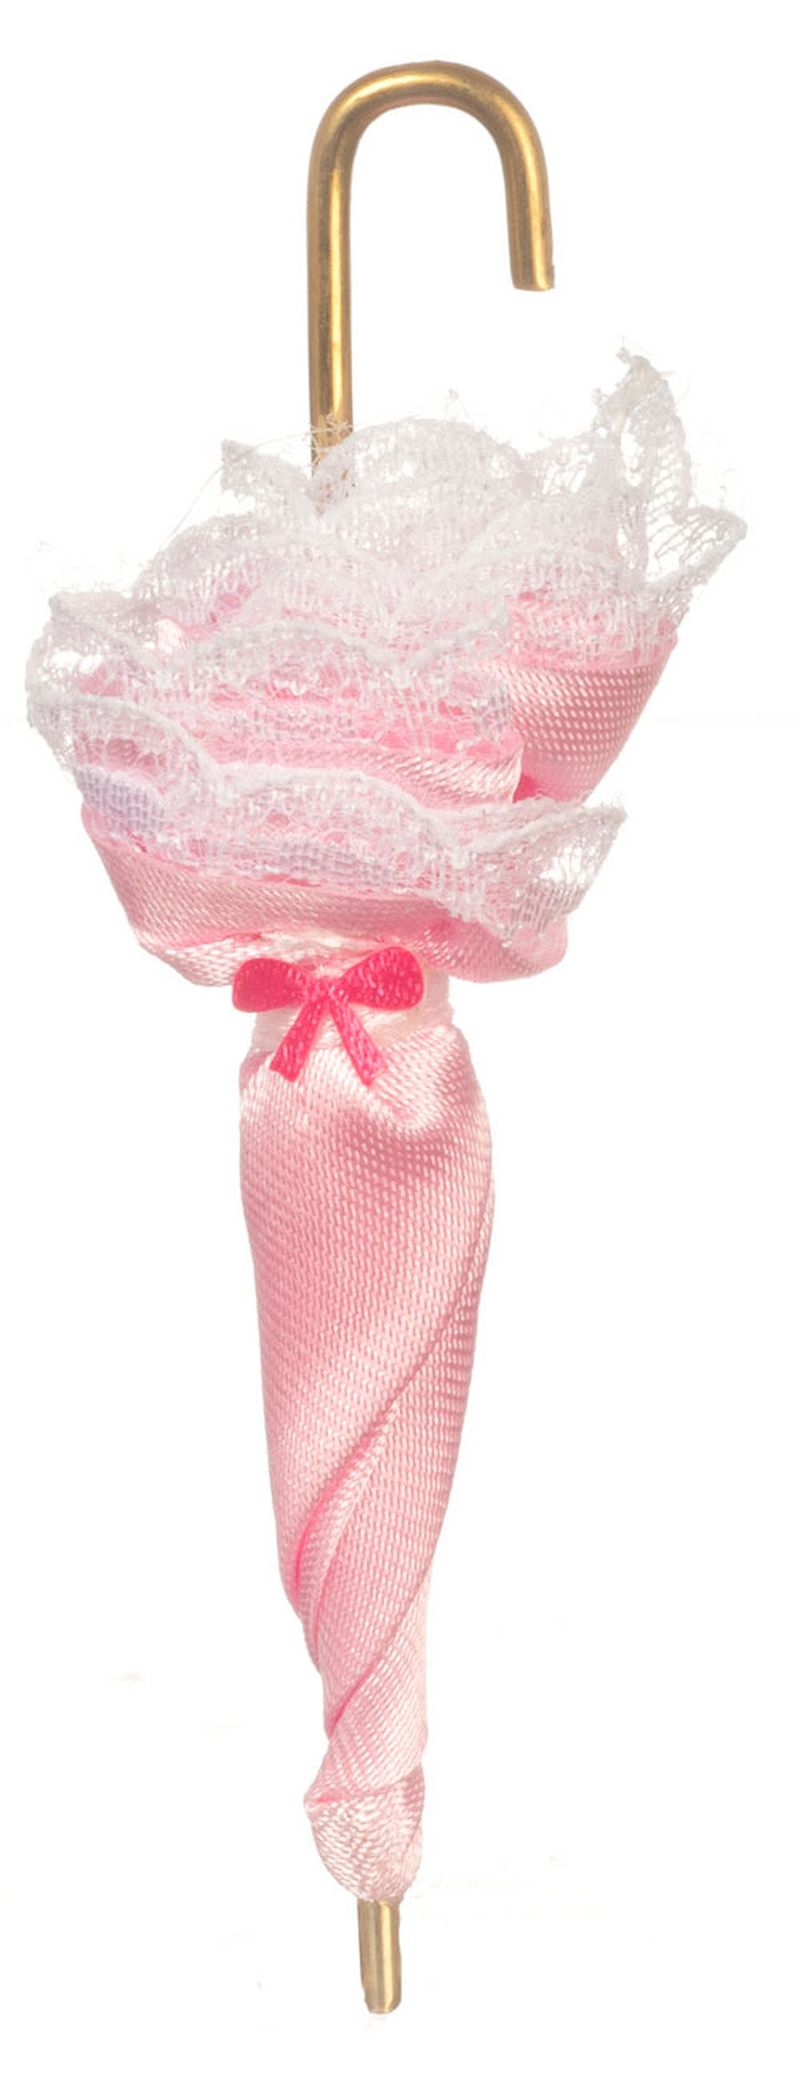 Victorian Umbrella in Pink Satin & Lace by Miniatures World